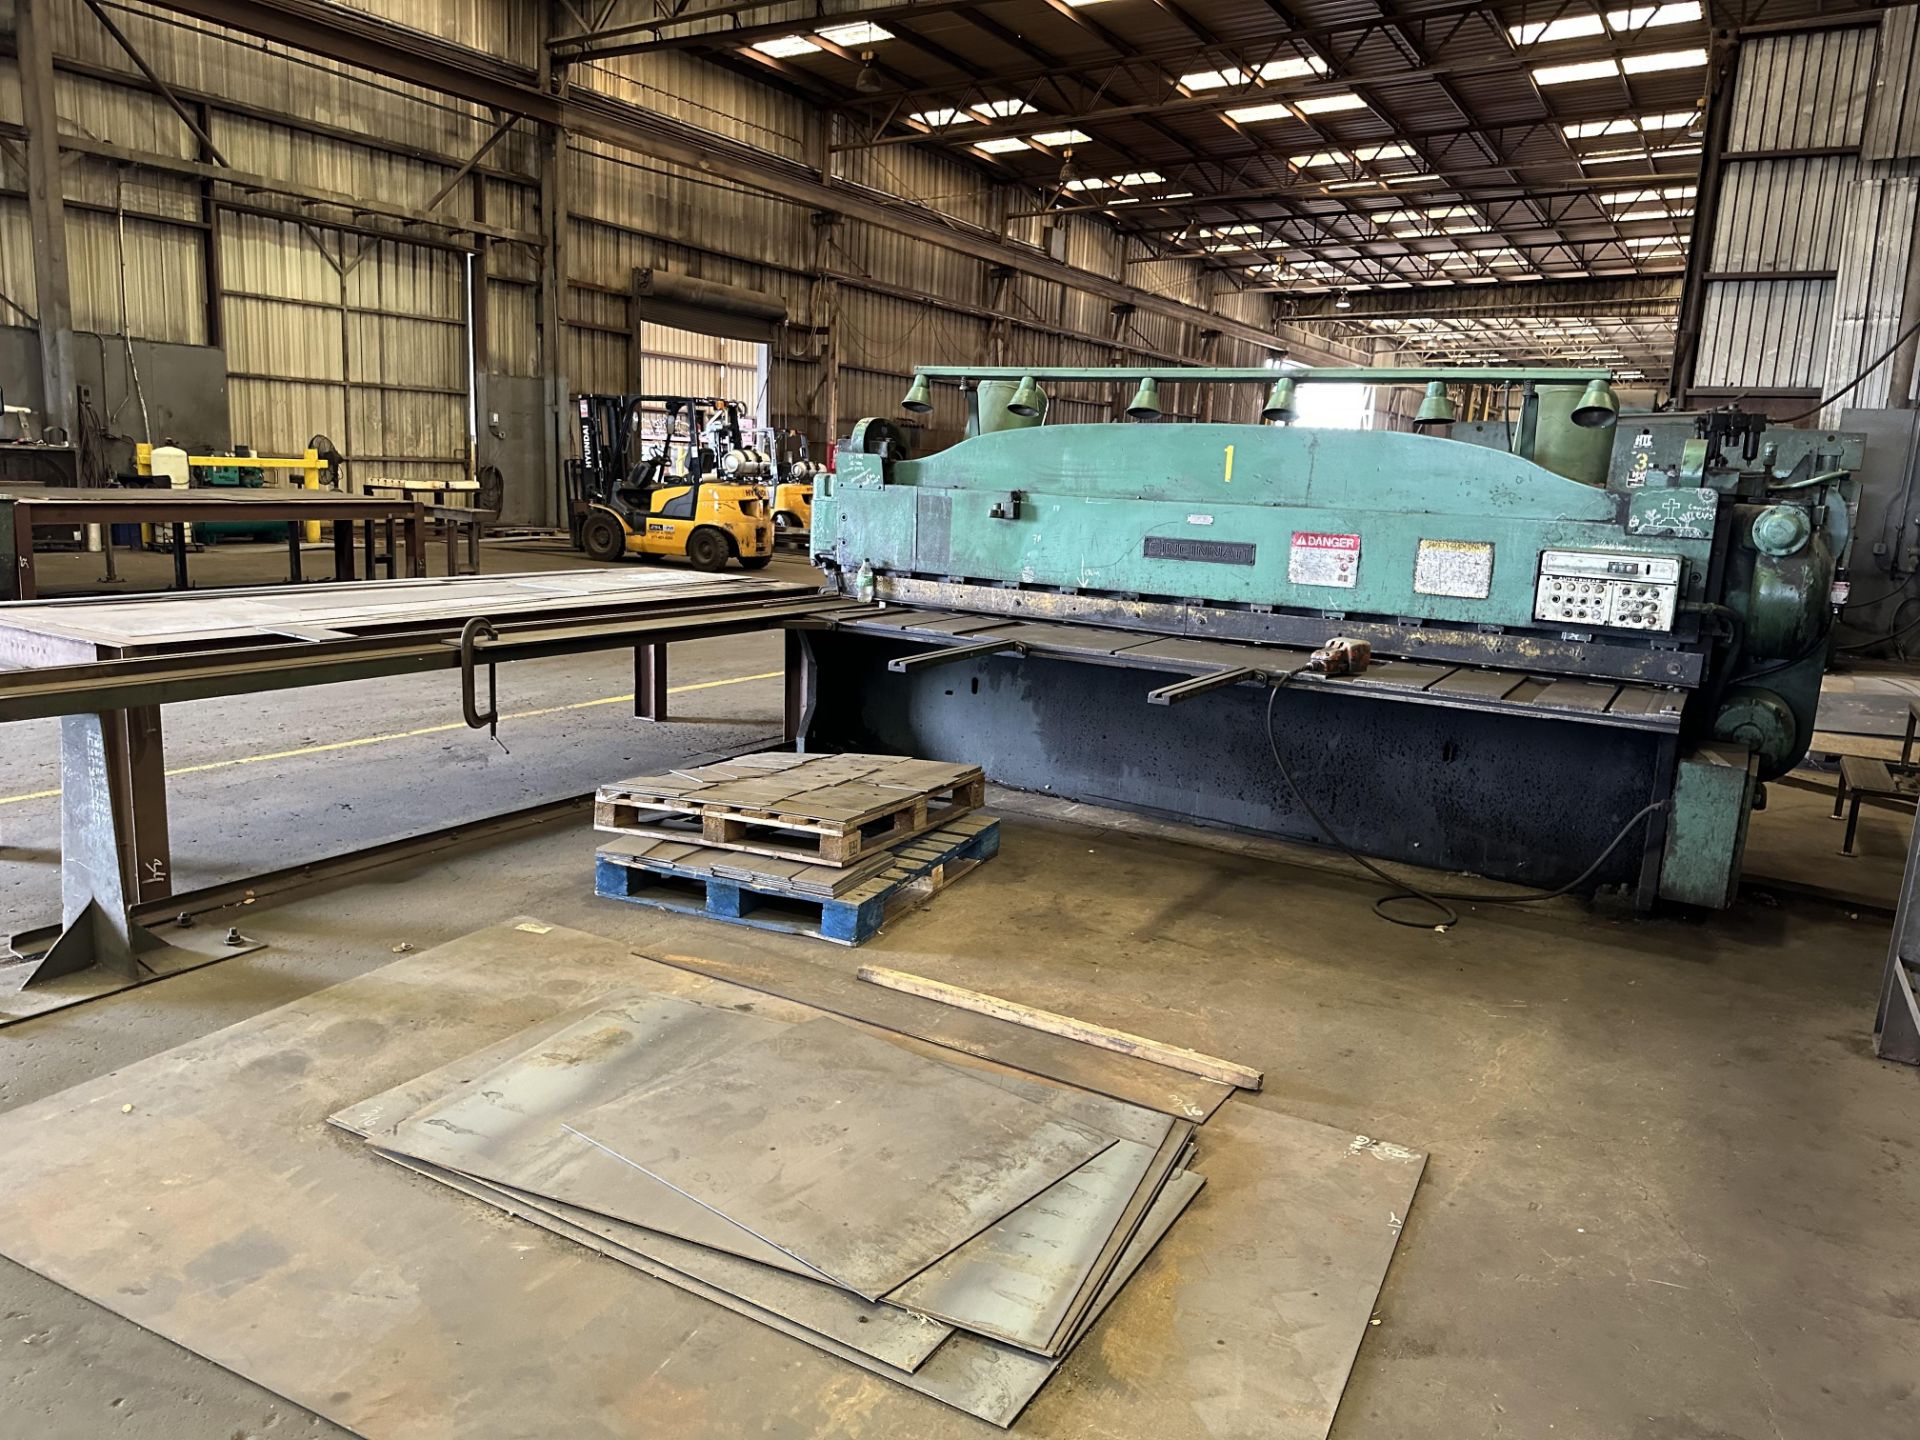 Structural Steel Fabricator Making Room for new equipment and new materials! - Image 13 of 26